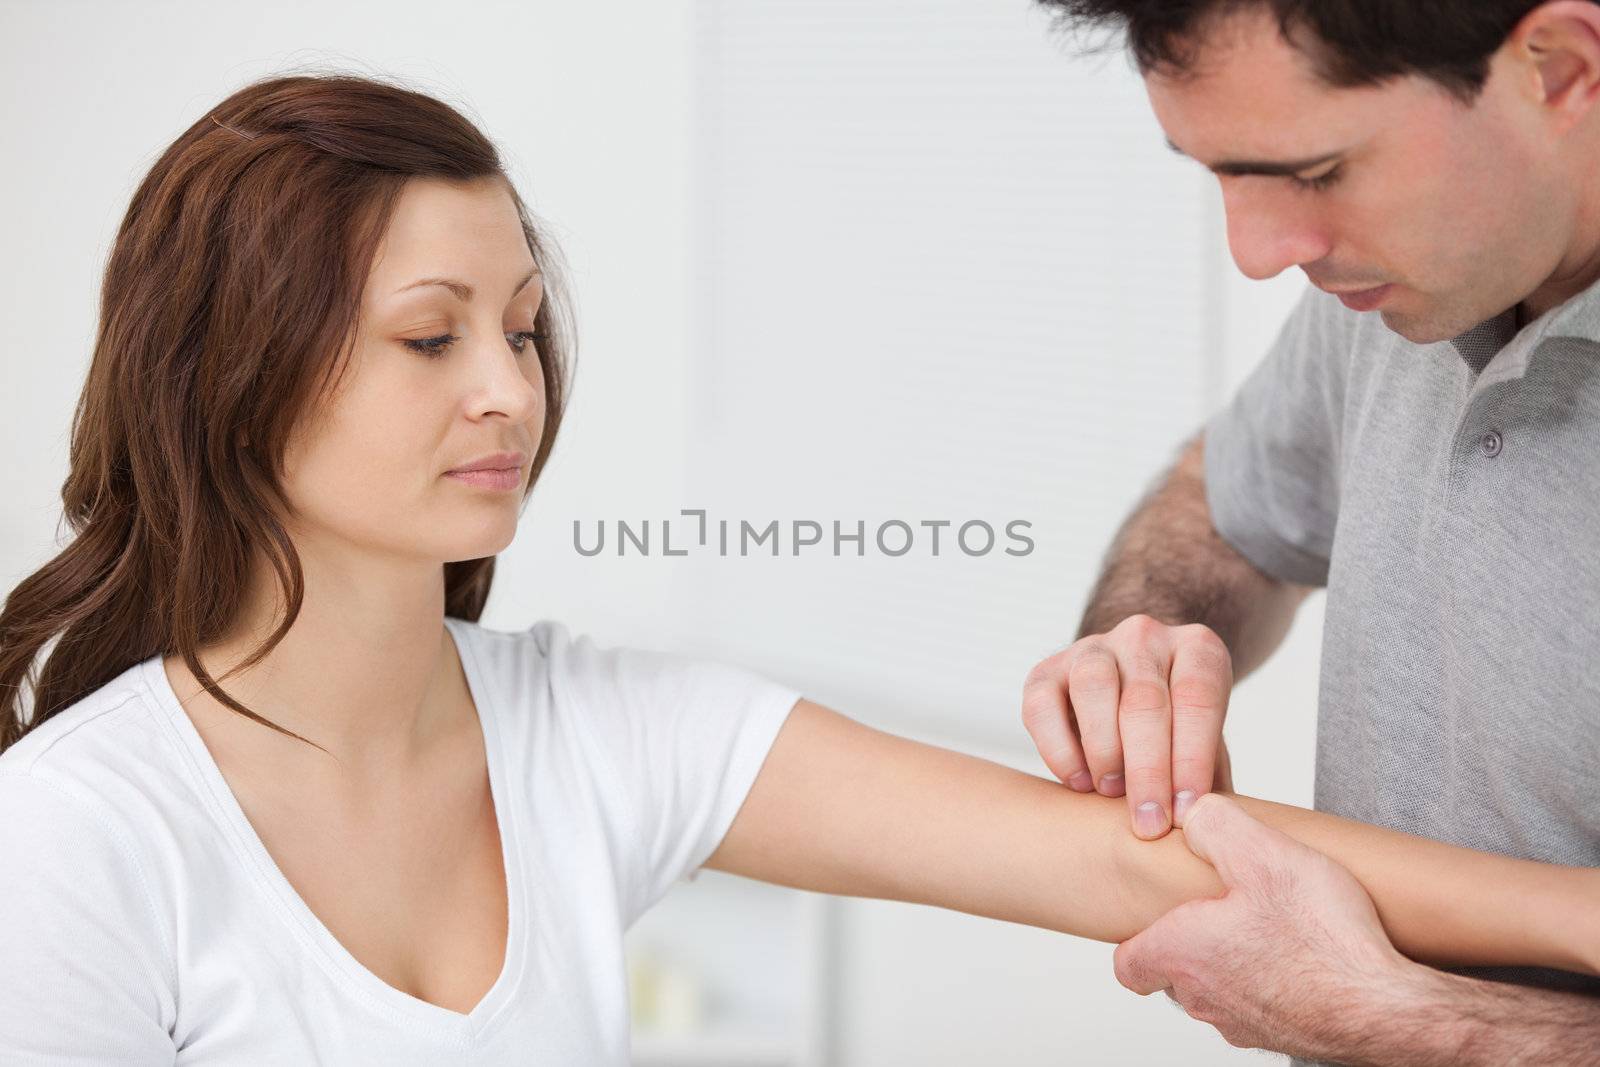 Doctor examining the arm of a patient by Wavebreakmedia